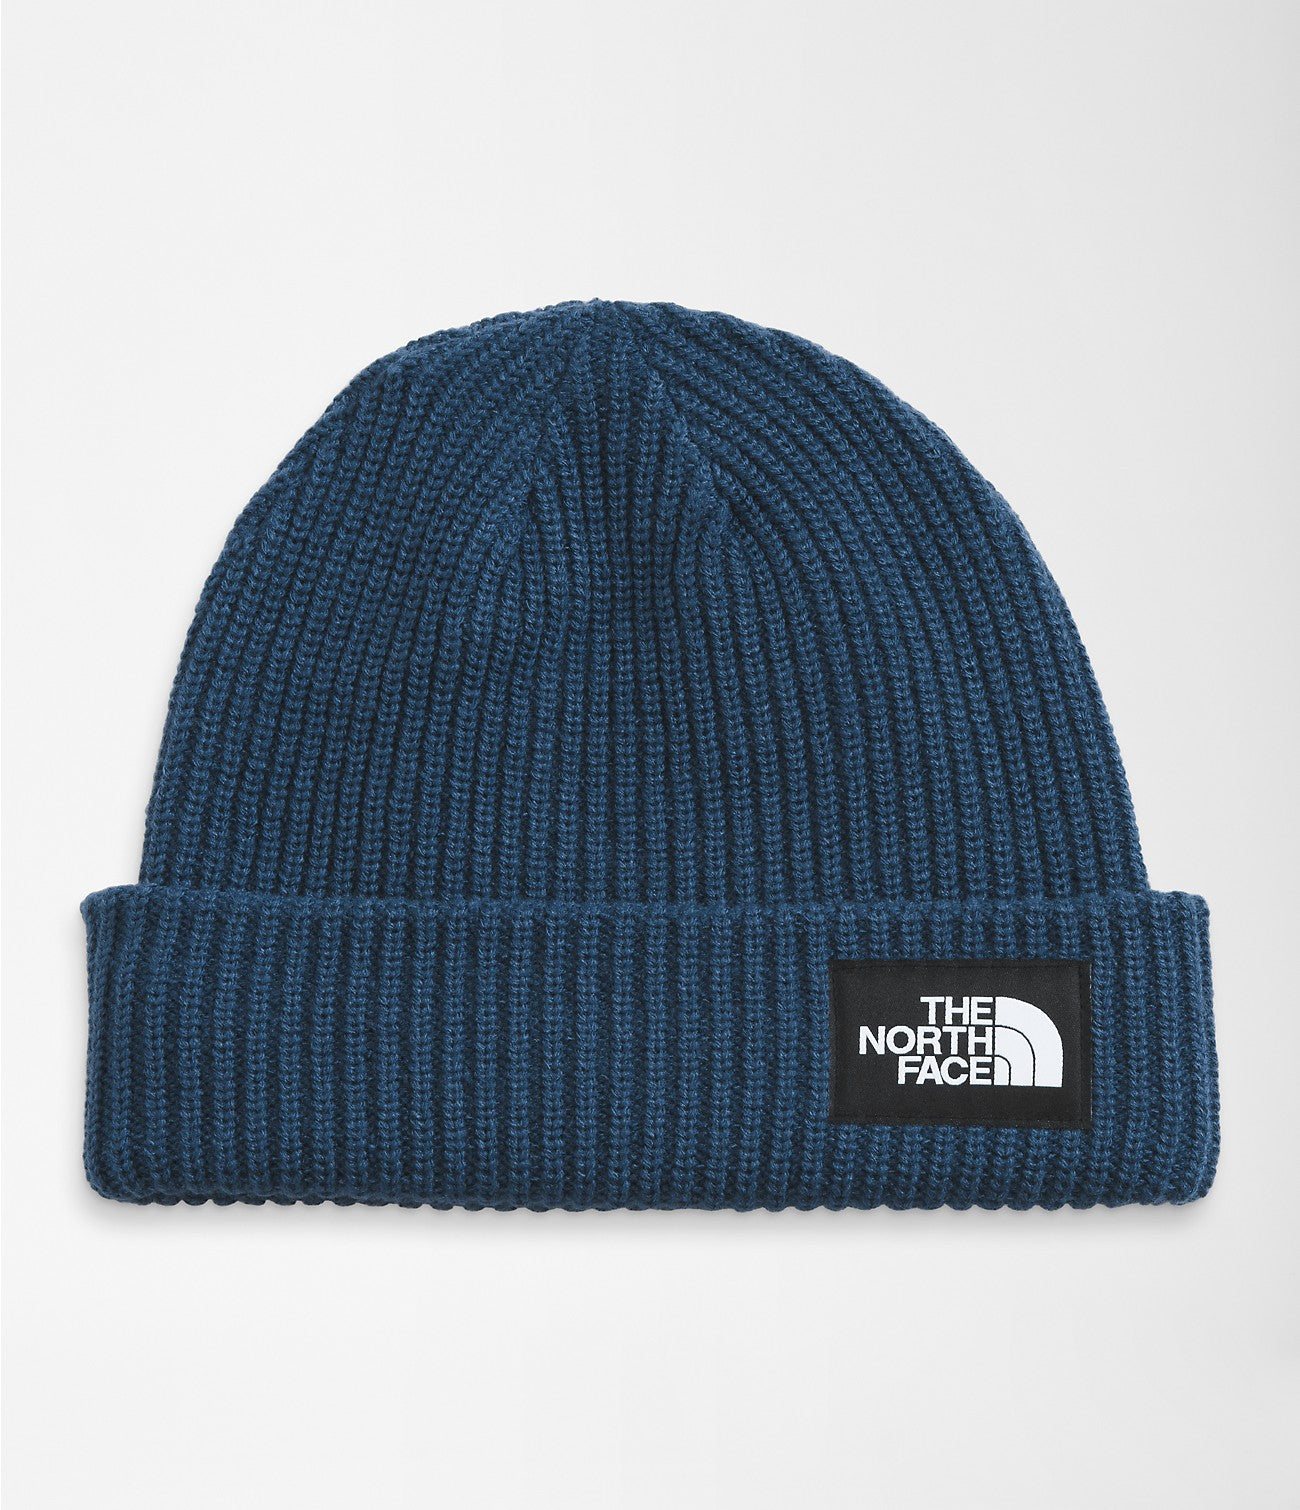 The North Face Salty Dog Beanie Accessories North Face Shady Blue-HDC  